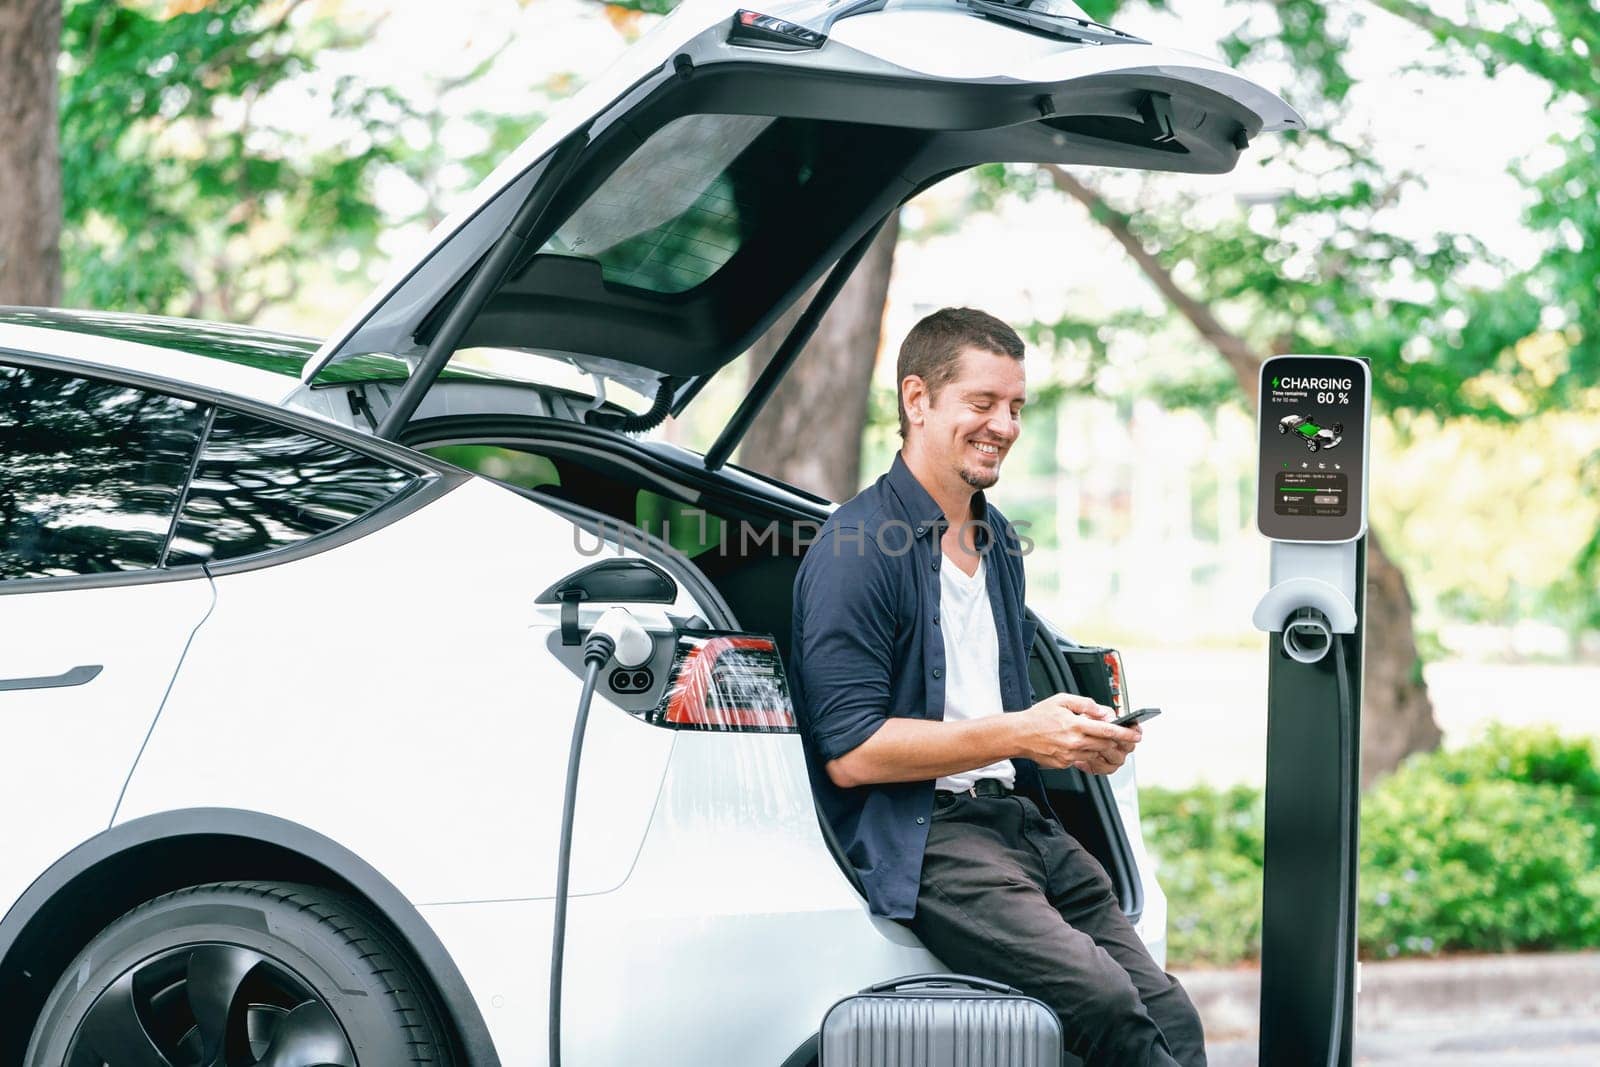 Man using smartphone to pay for electric car charging. Exalt by biancoblue